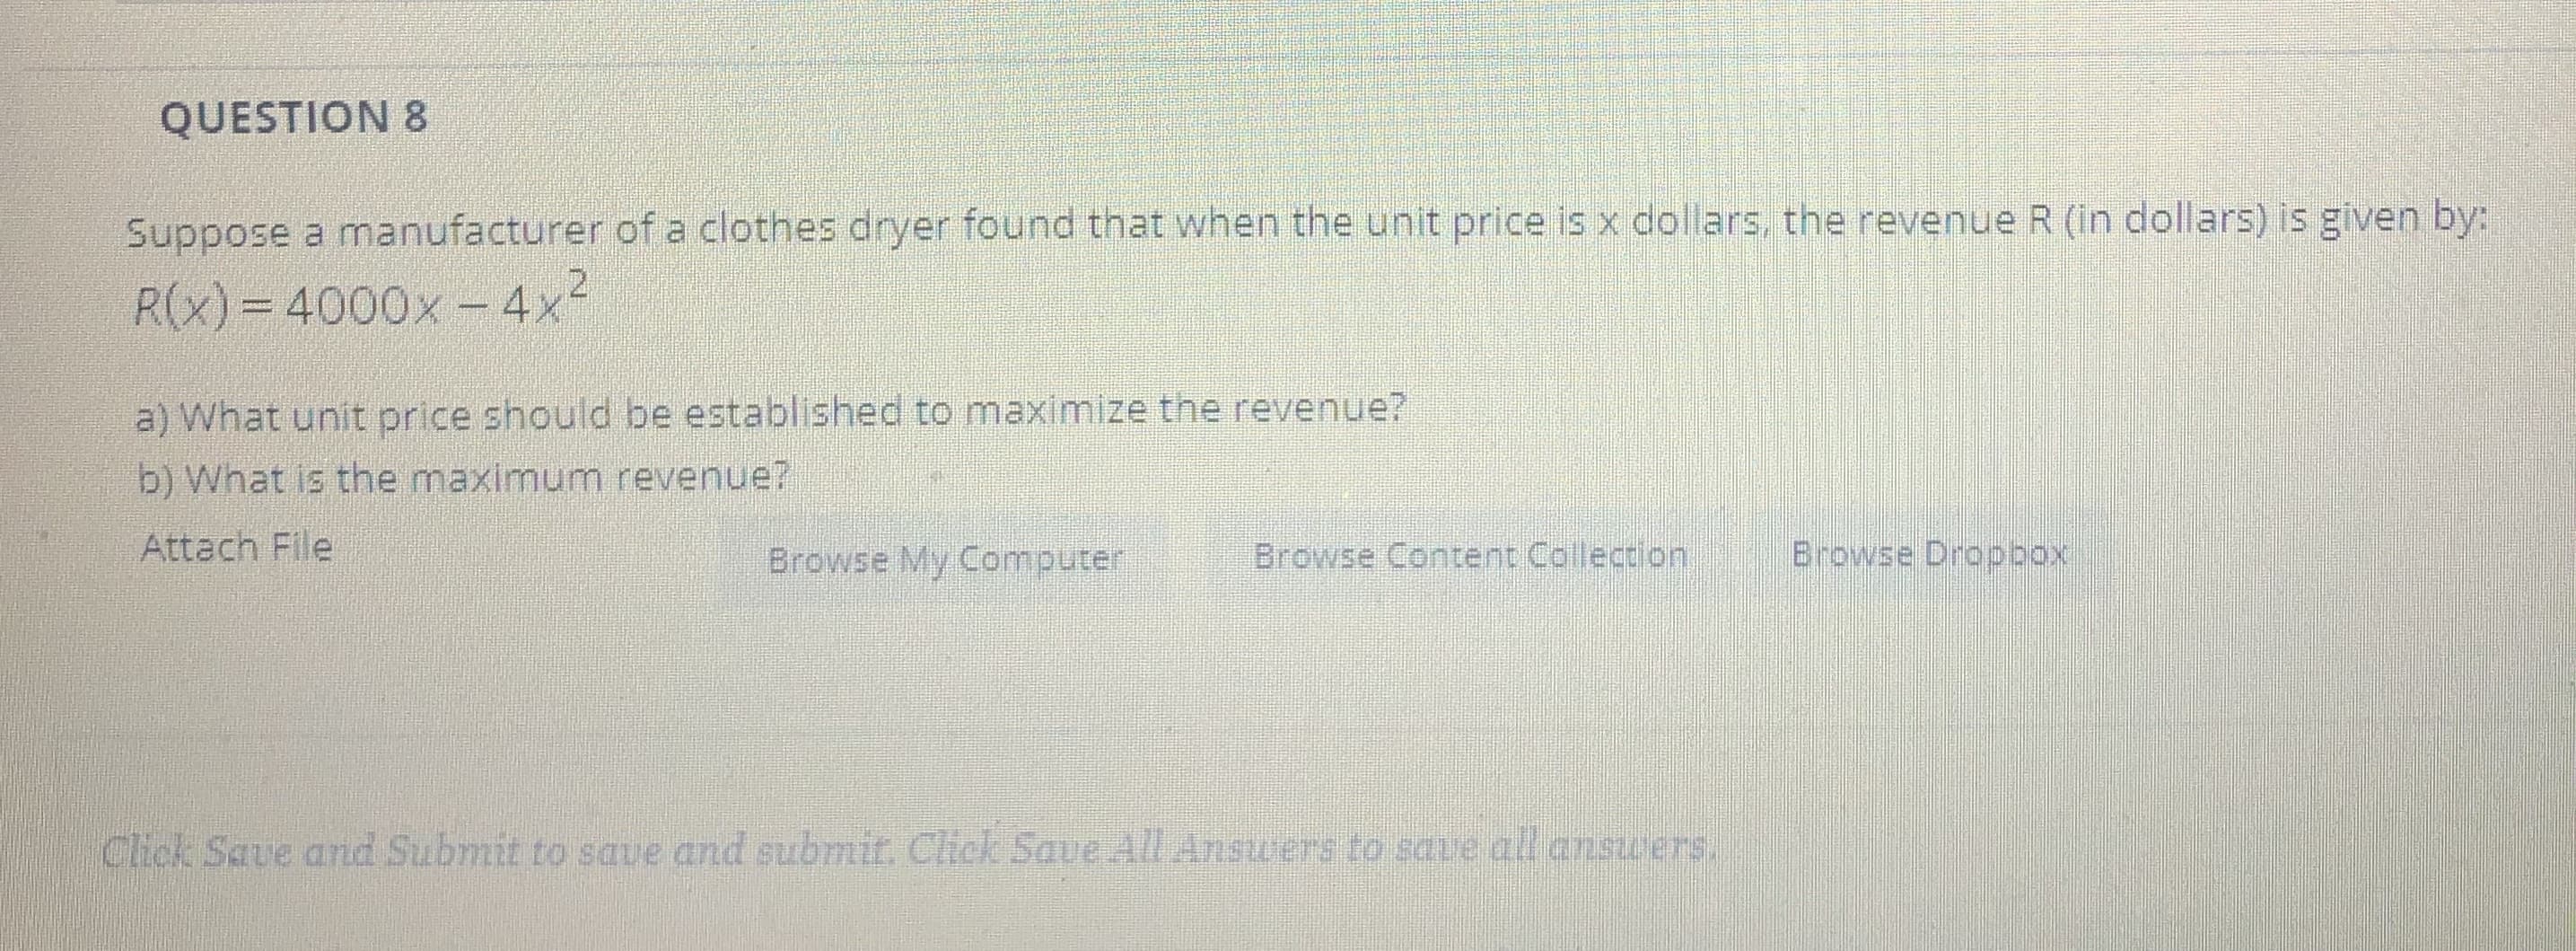 QUESTION 8
Suppose a manufacturer of a clothes dryer found that when the unit price is x dollars, the revenue R (in dollars) is given by:
R(x)=4000x - 4x-
a) What unit price should be established to maximize the revenue?
b) What is the maximum revenue?
